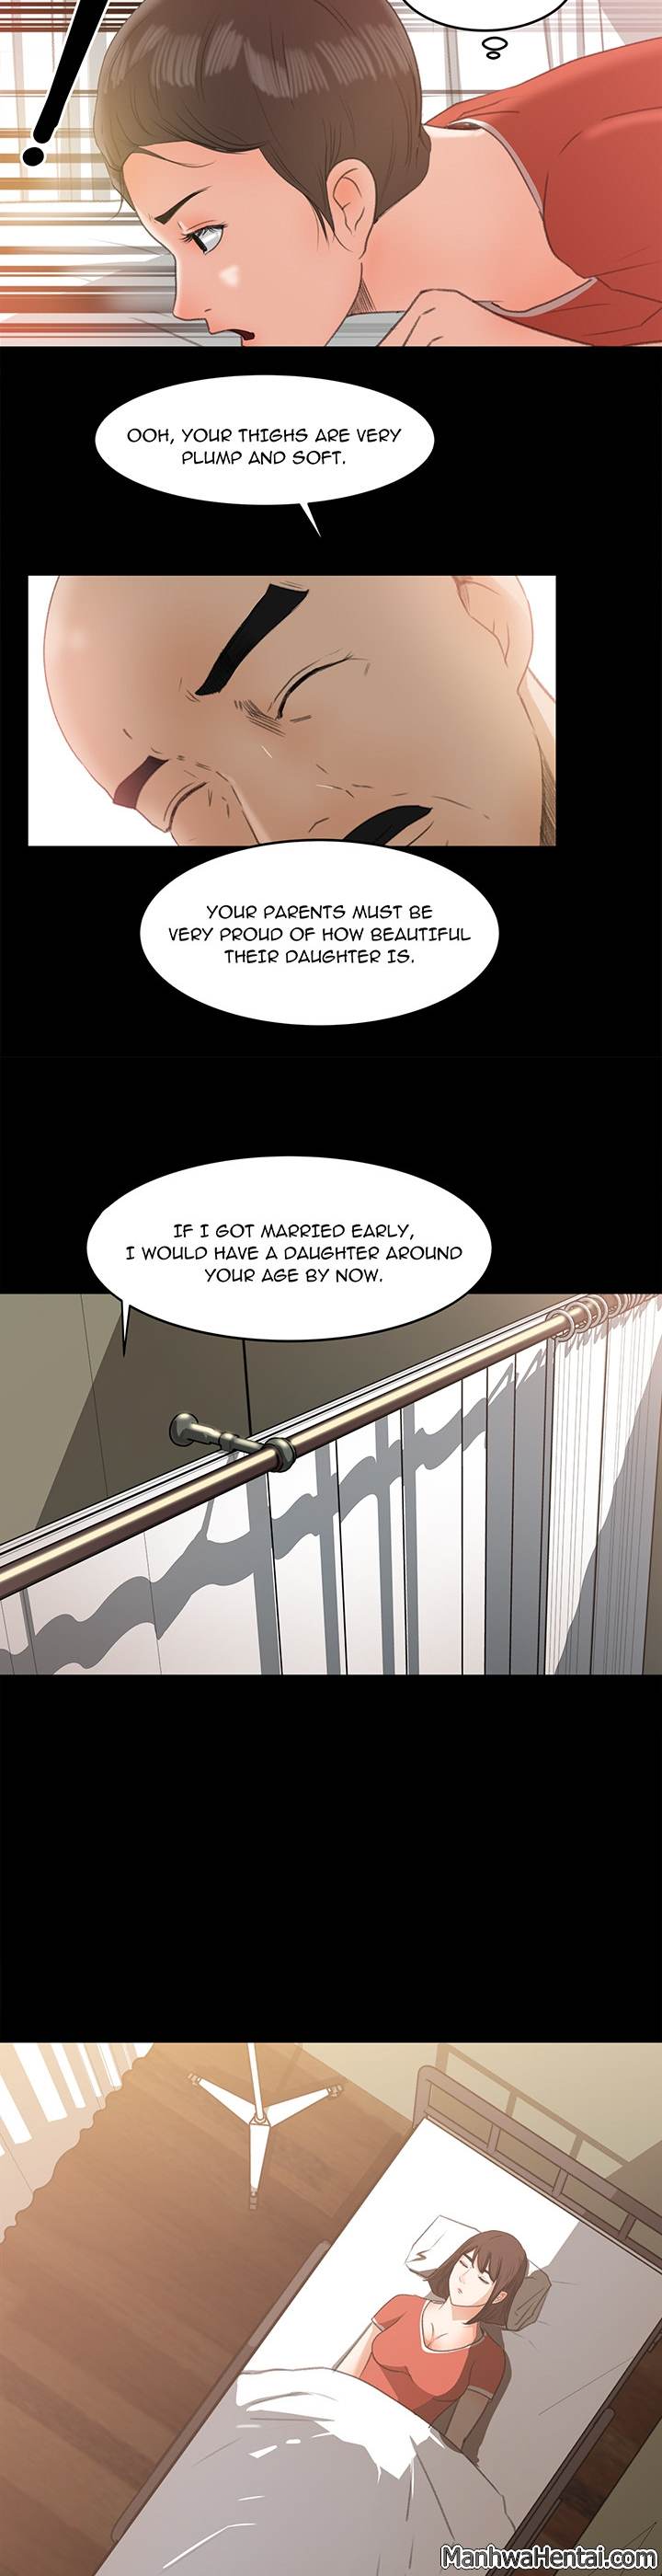 Inside the Uniform - Chapter 12 Page 15